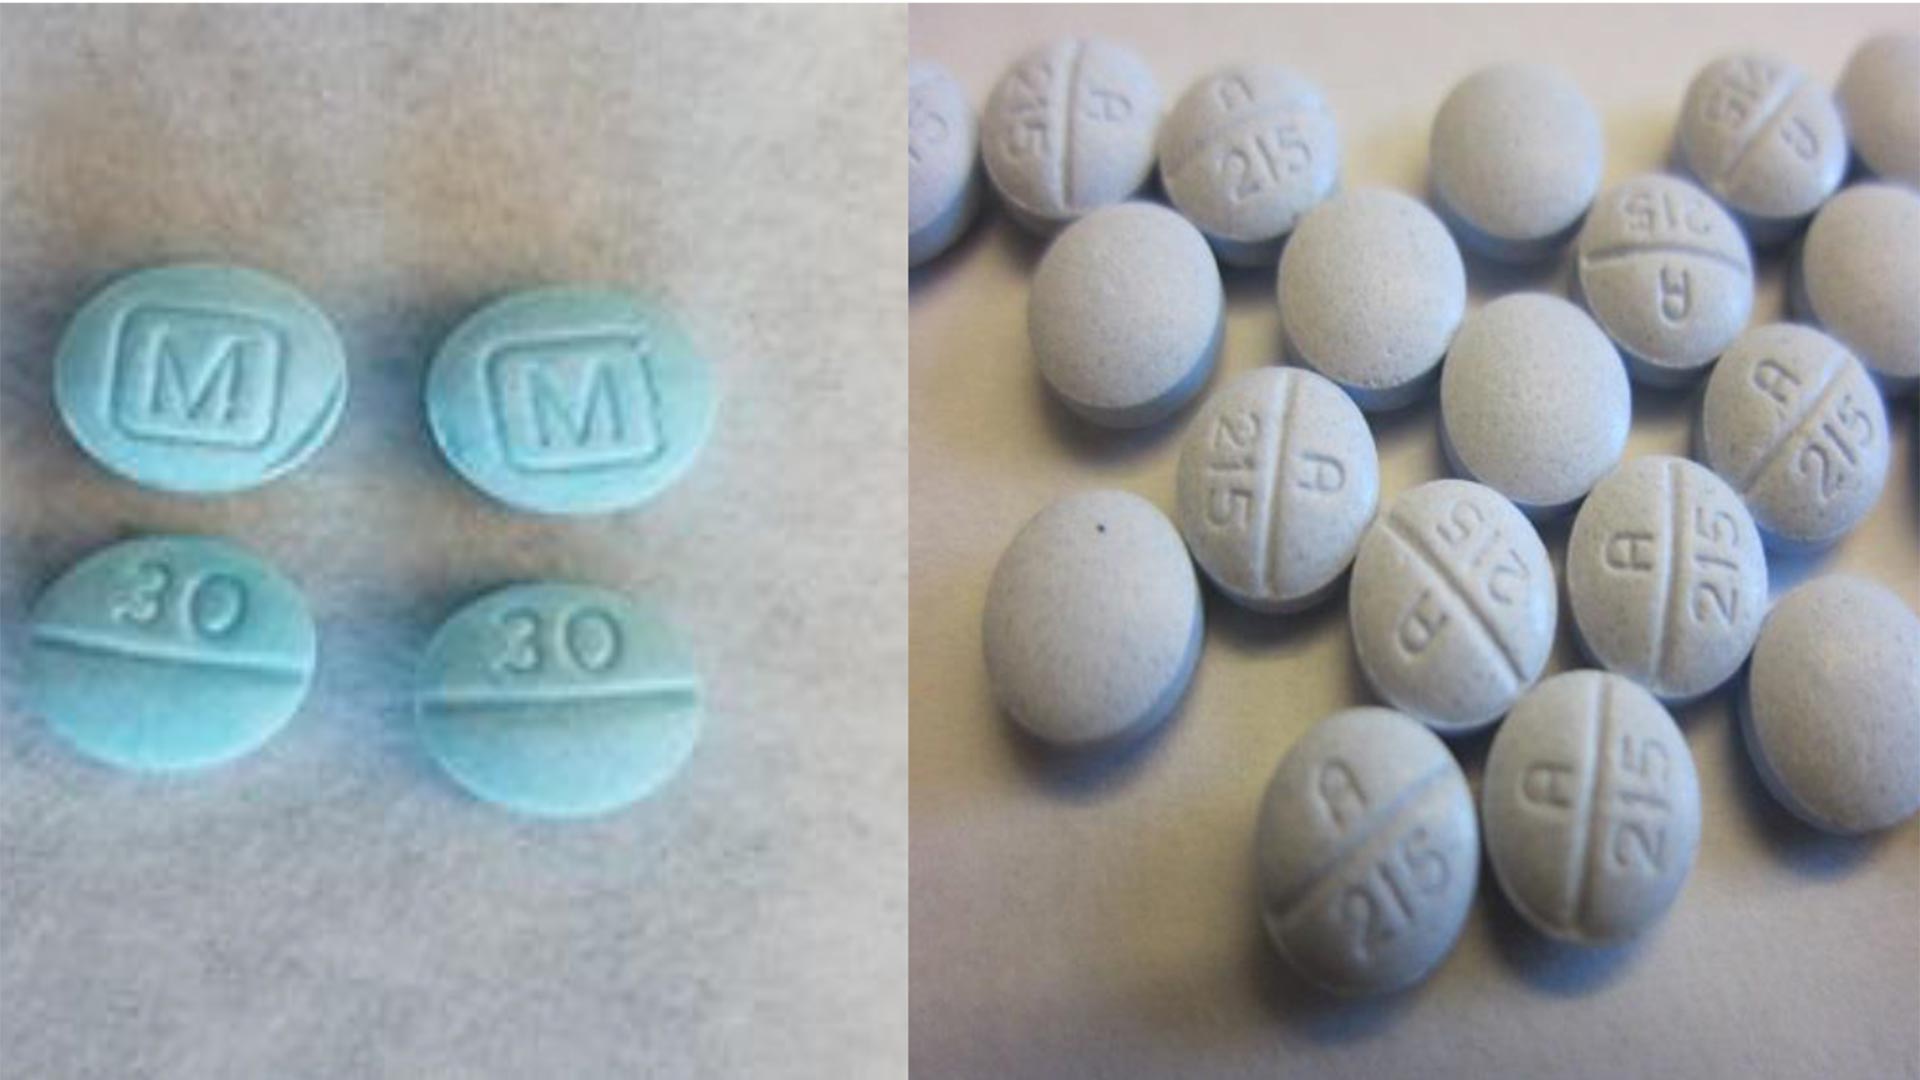 Examples of the fake oxycodone confiscated by Tucson Police